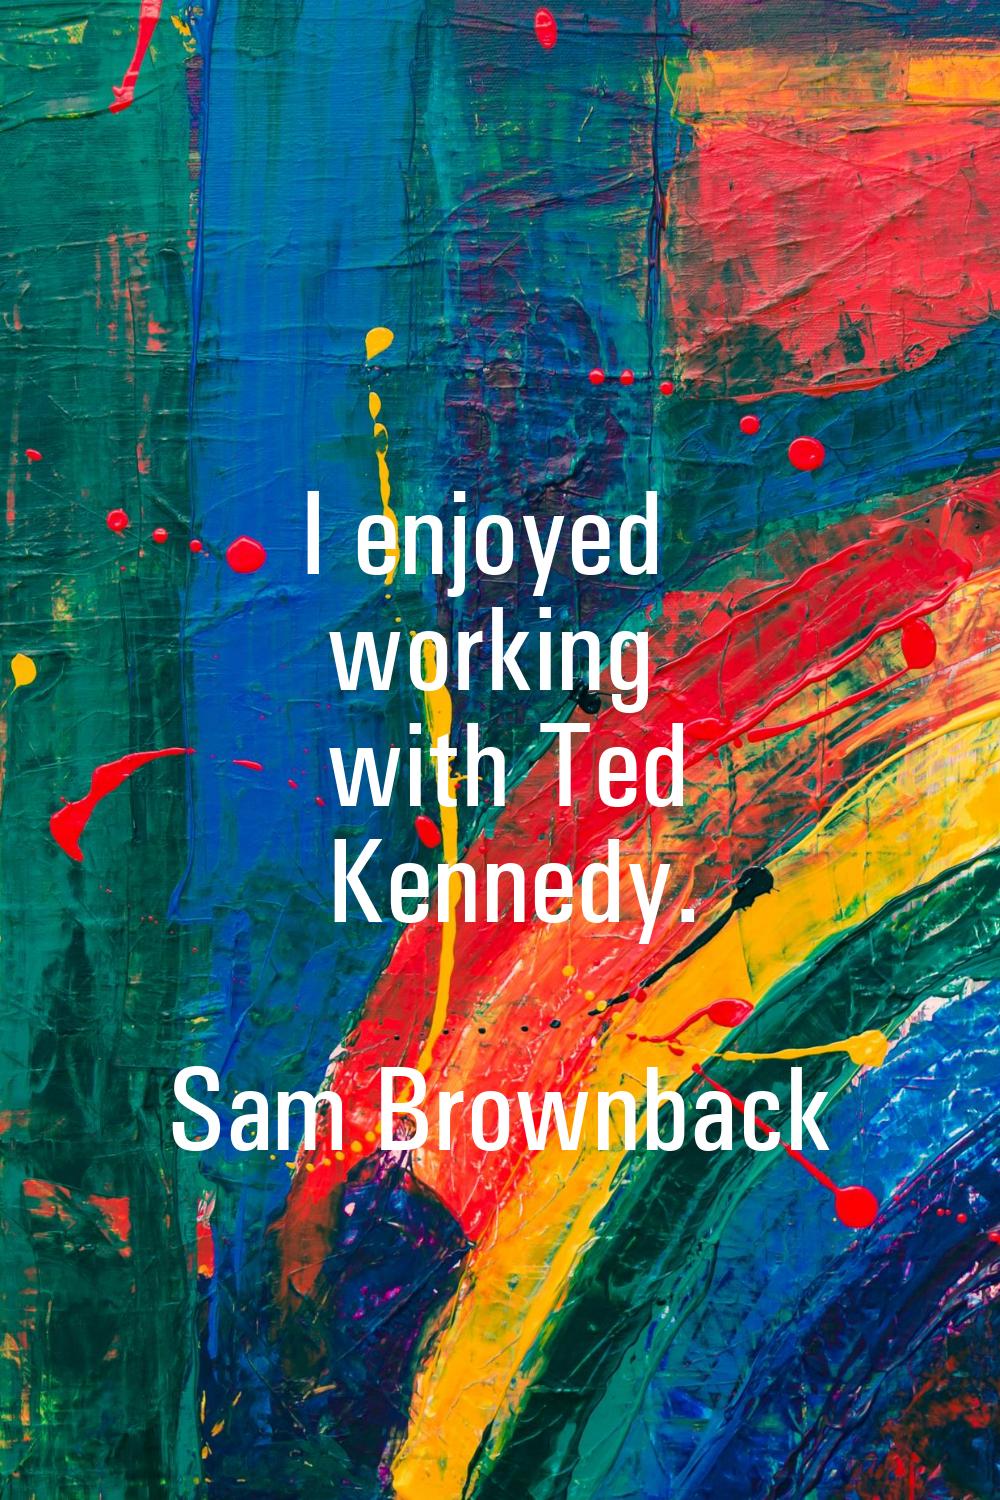 I enjoyed working with Ted Kennedy.